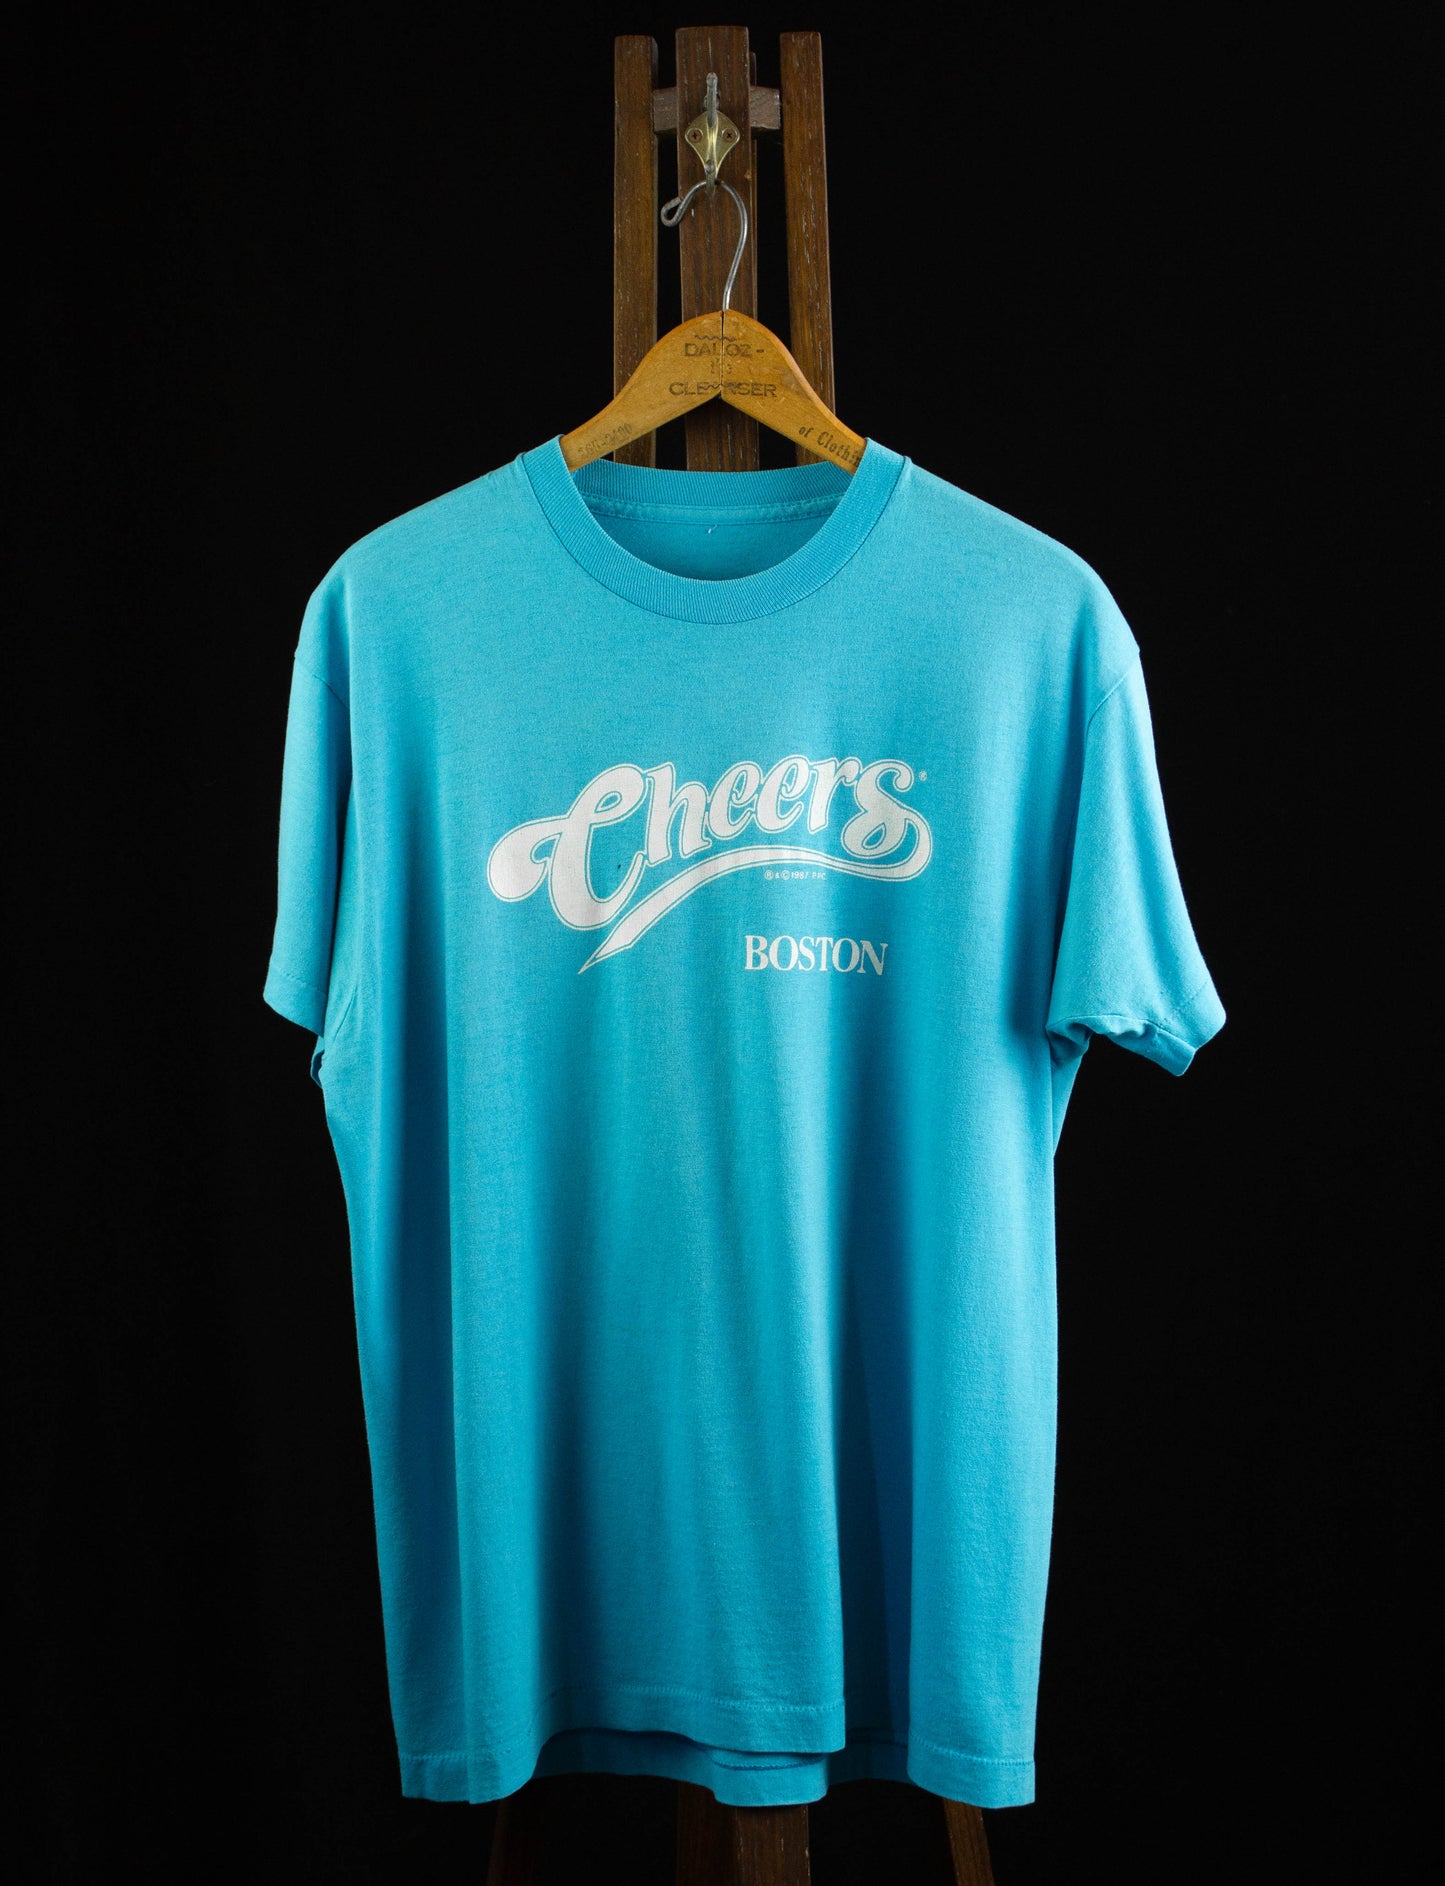 Vintage Cheers Boston Graphic T Shirt 1987 TV Show Bar Light Blue and White Large